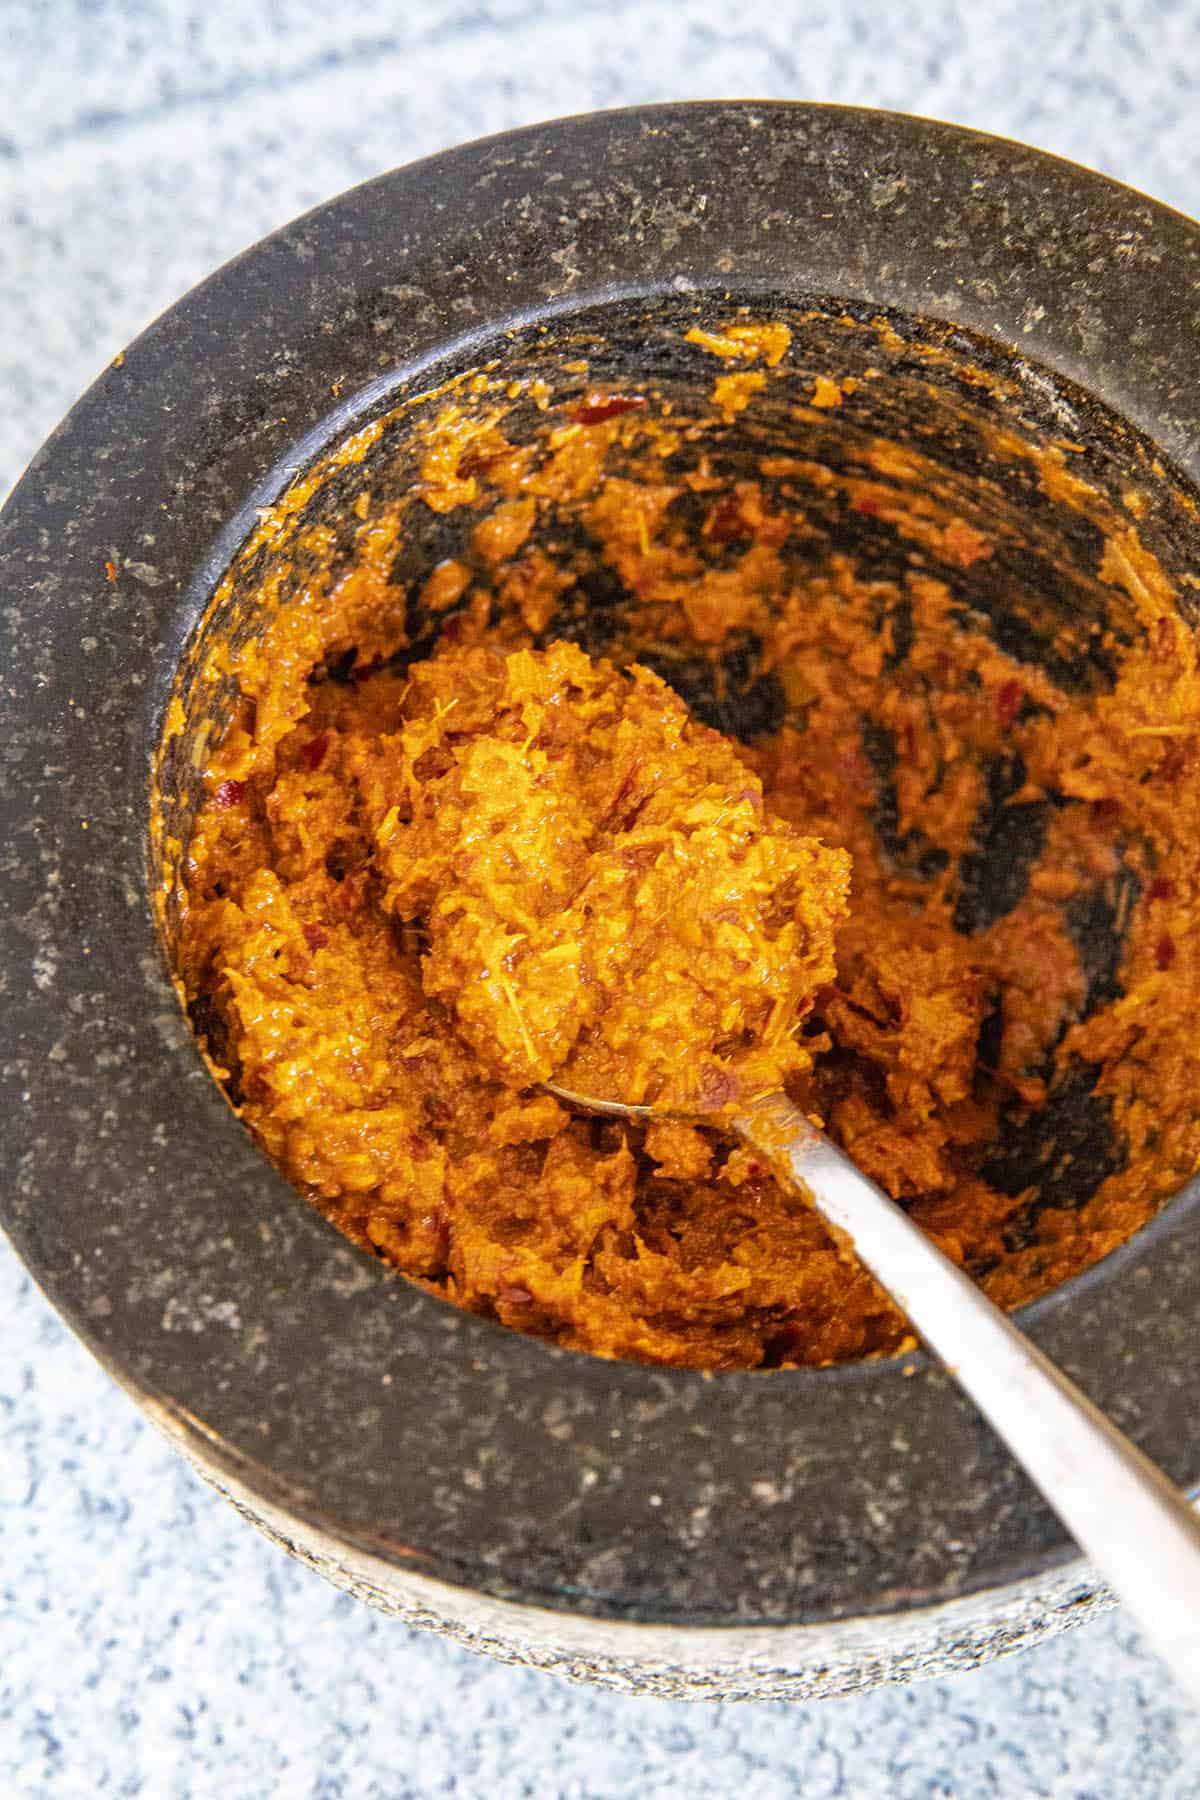 Panang Curry Paste in a grinding bowl